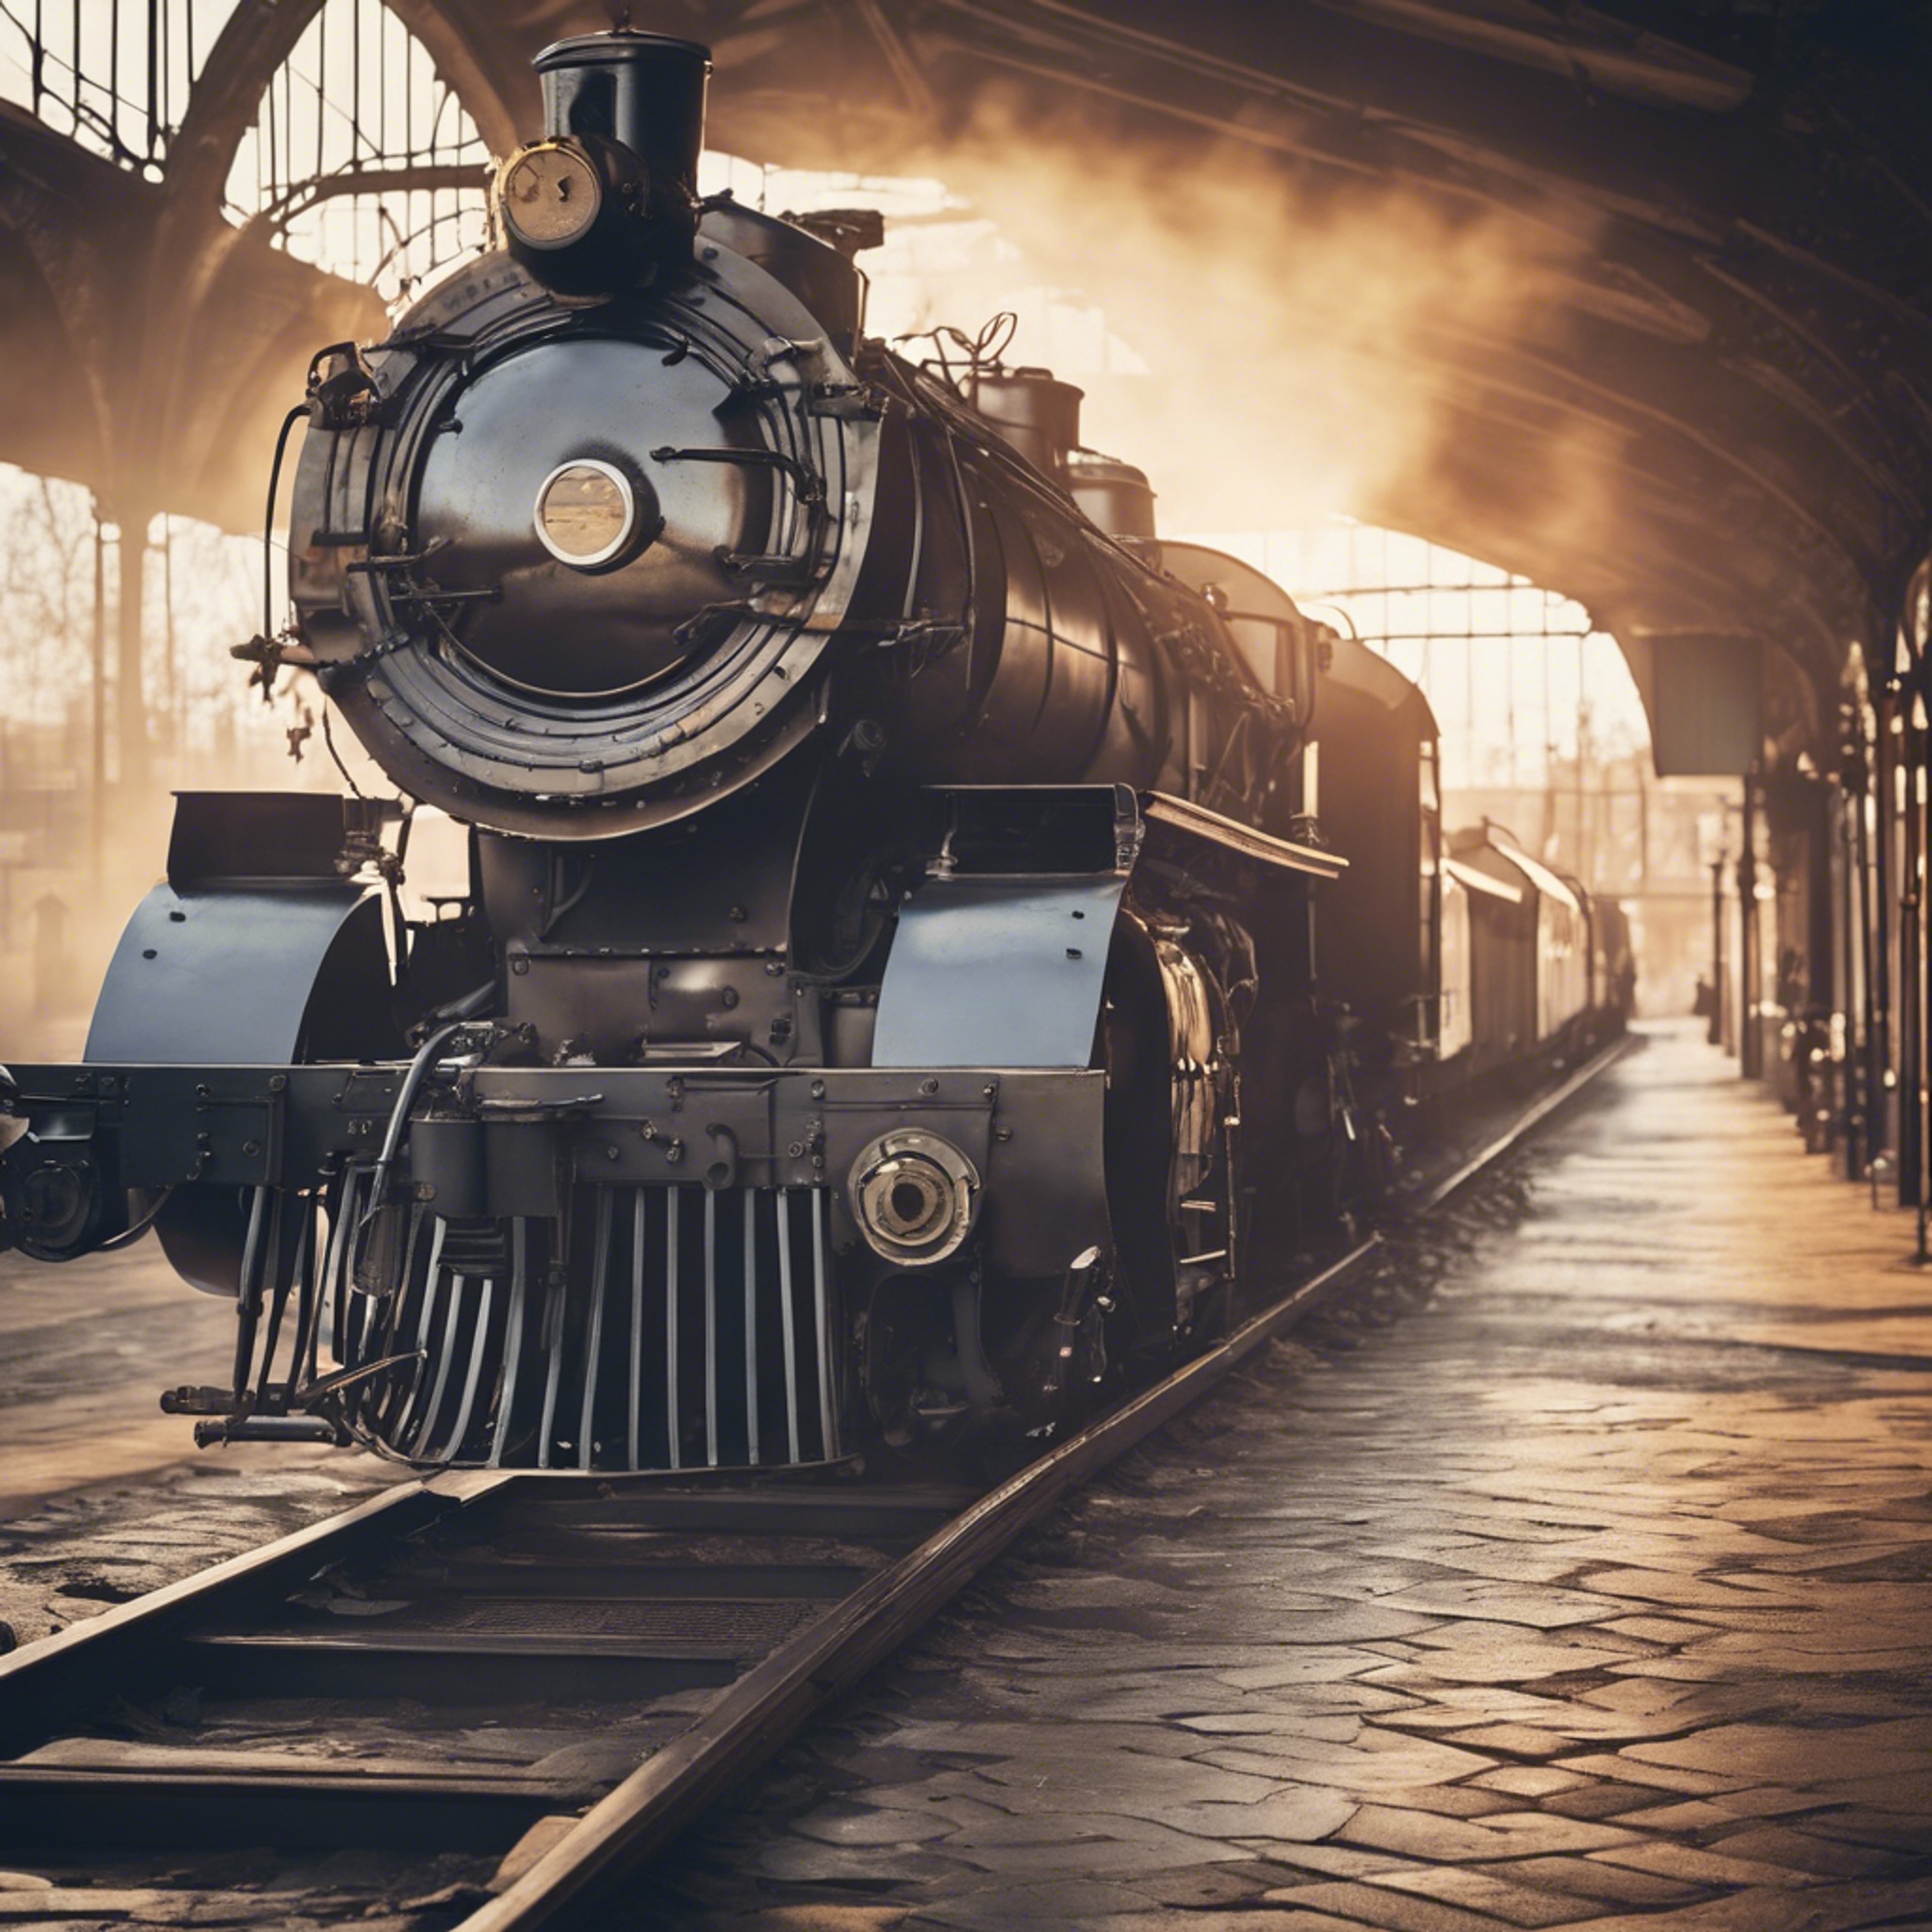 Vintage train station at dawn with an antique locomotive emitting steam.壁紙[450823d5e7f445219bb2]